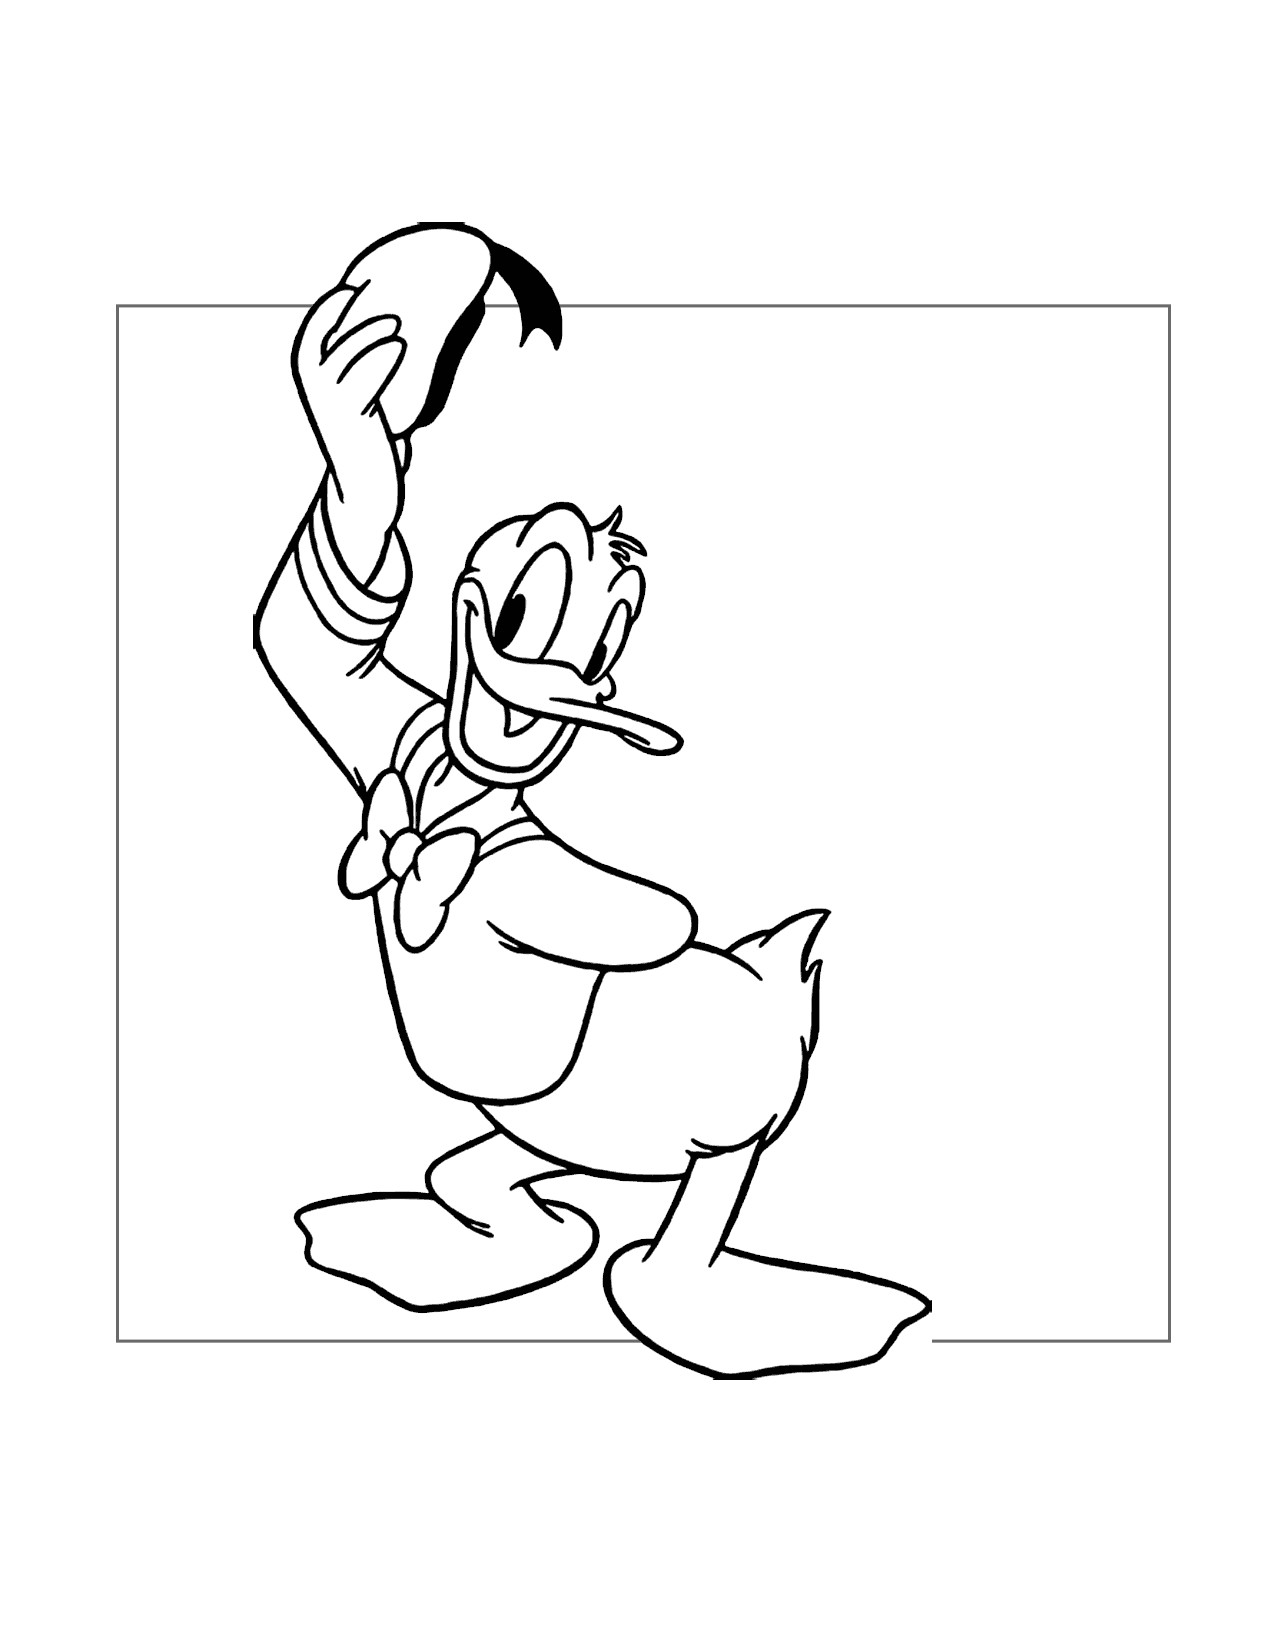 Donald Duck Tips His Hat Coloring Page